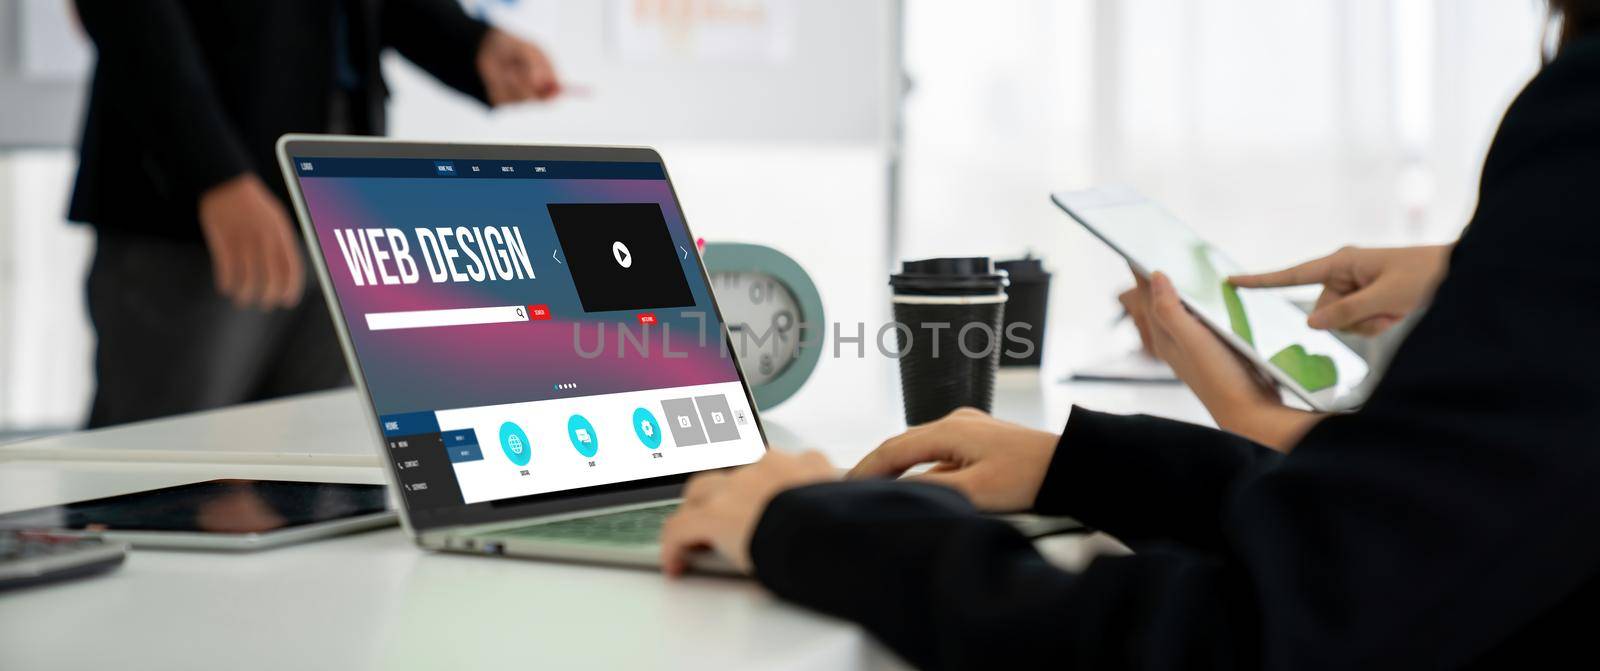 Website design software provide modish template for online retail business and e-commerce